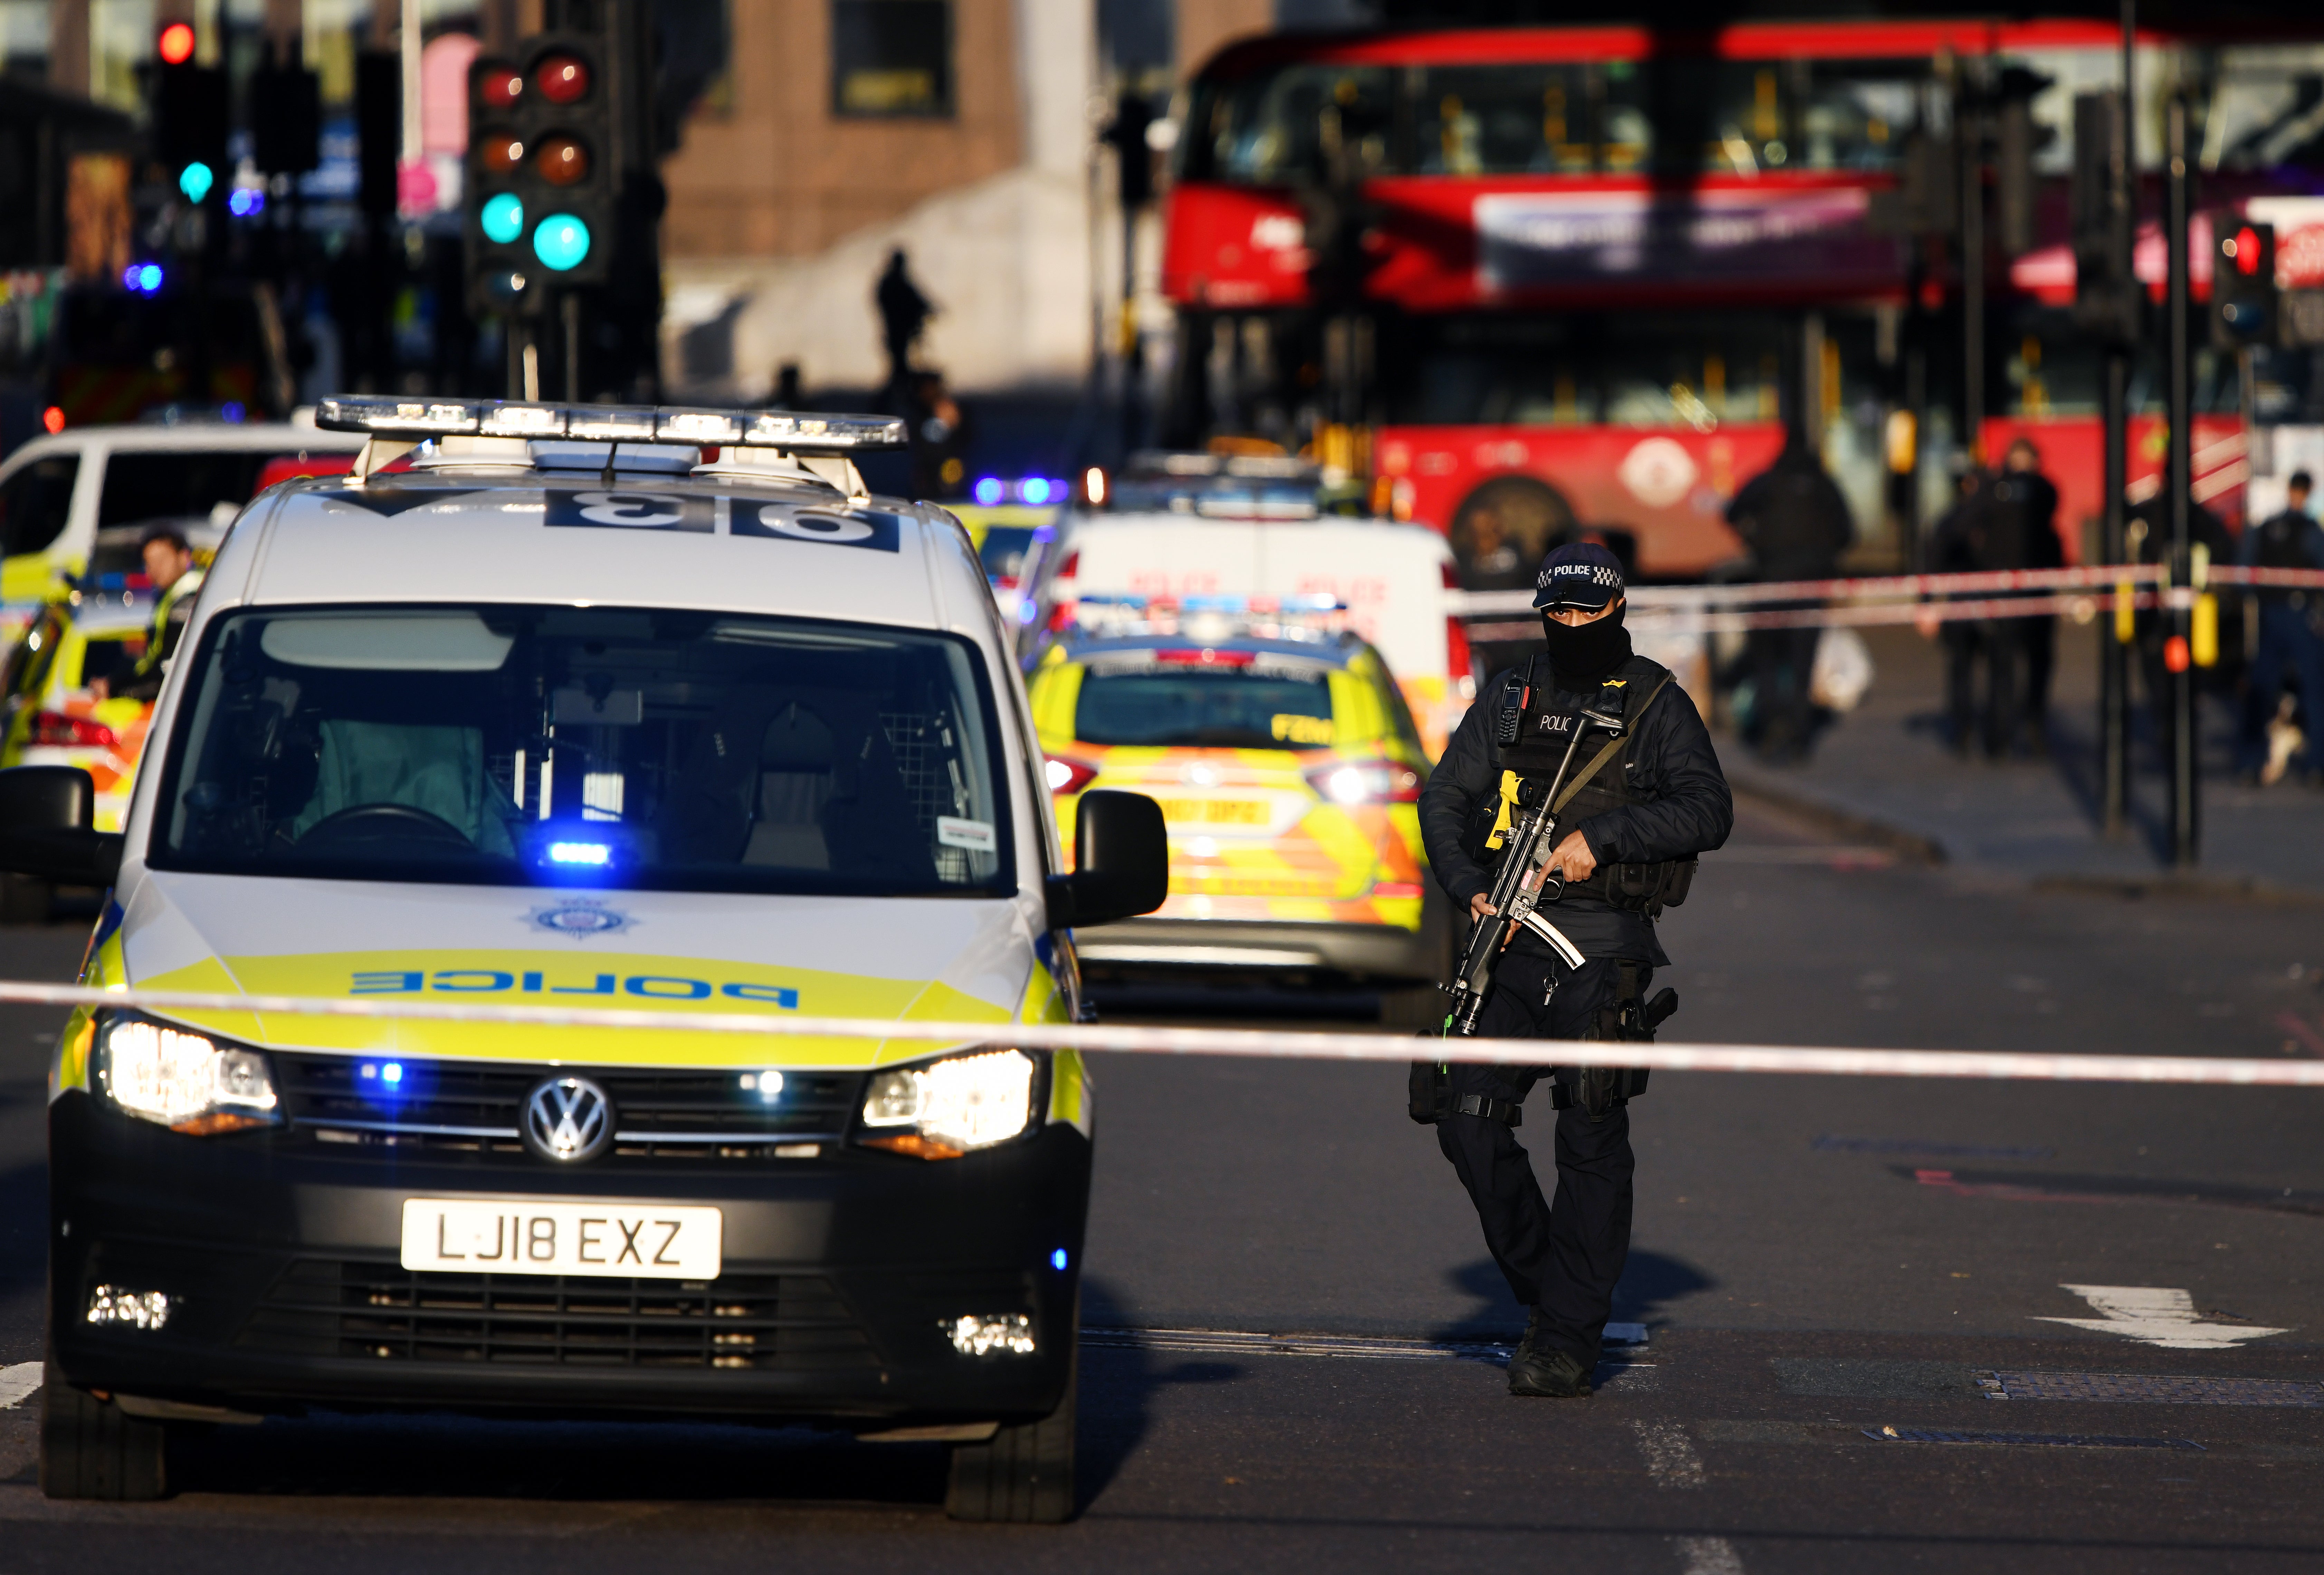 Following the attack at Fishmongers’ Hall, officers fired 20 rounds at attacker who had been restrained by members of the public on London Bridge